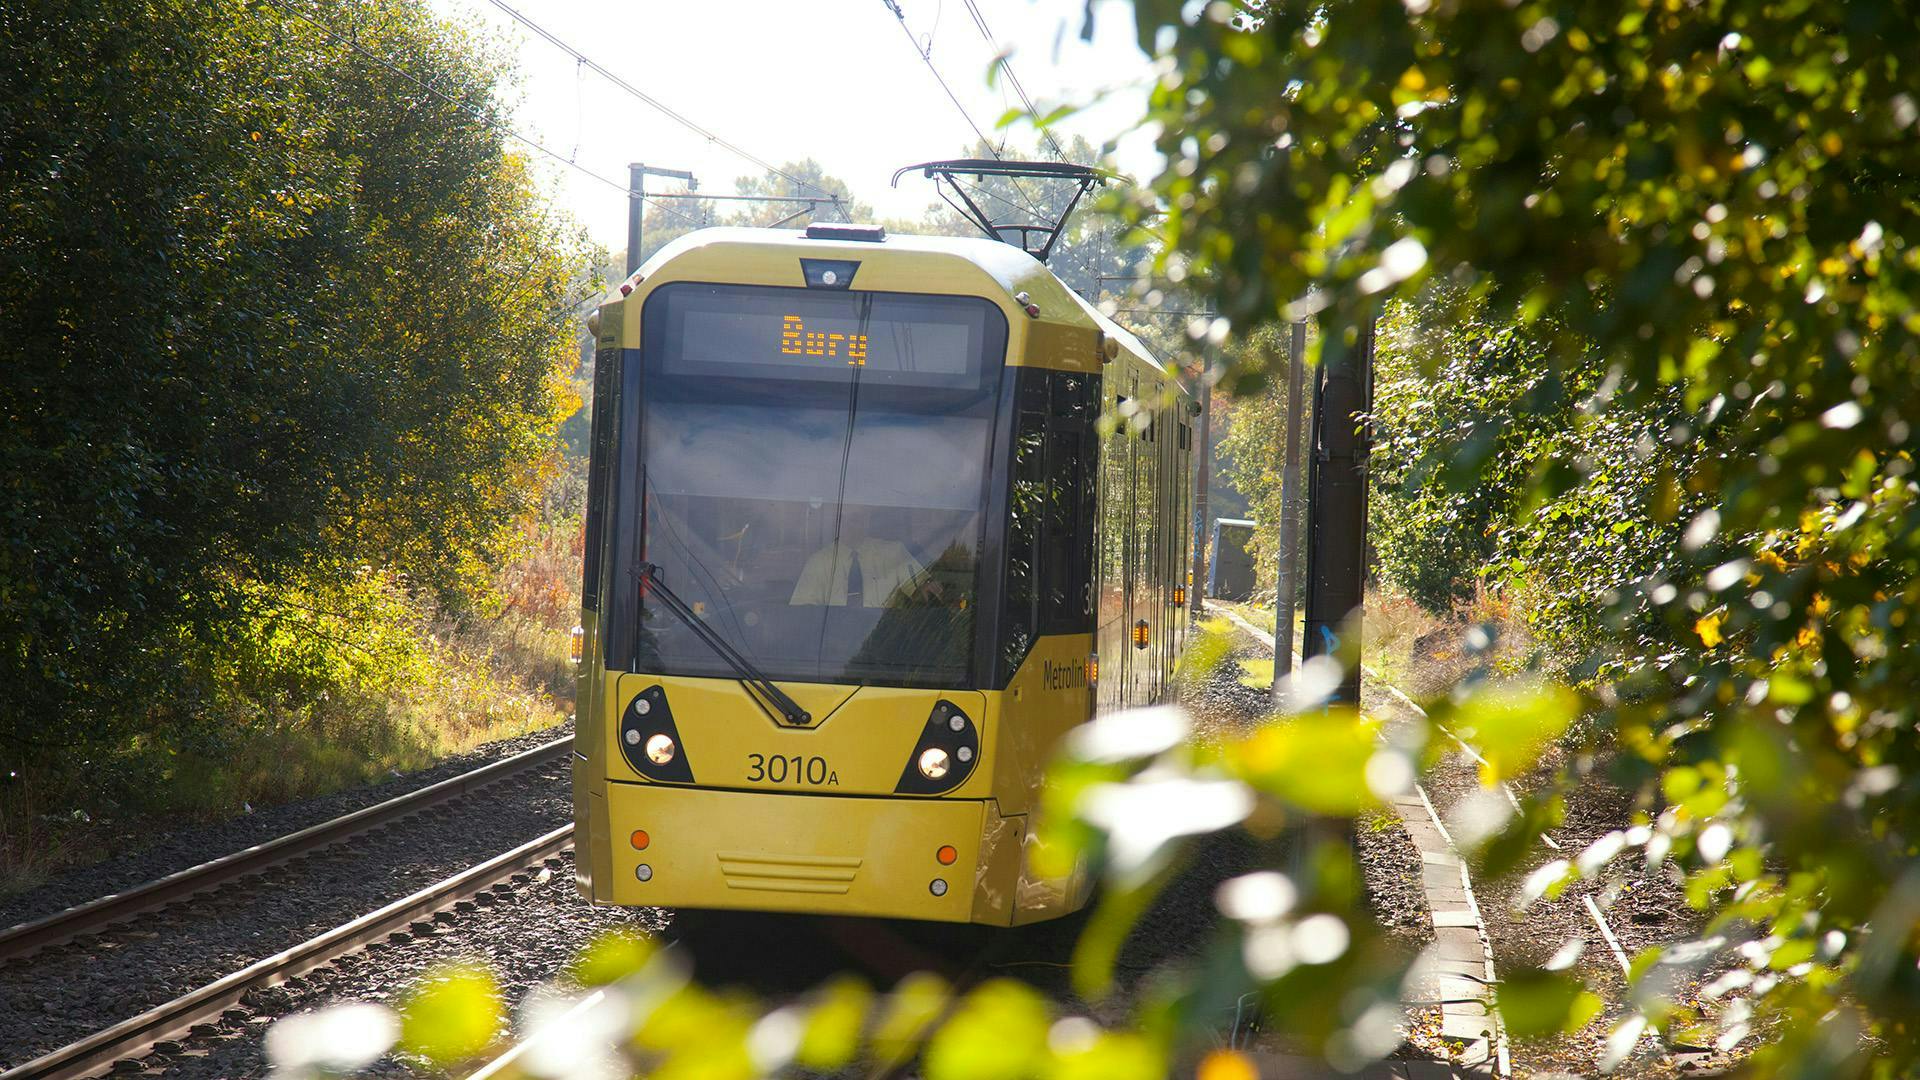 A yellow train with Bury as the destination, with some greenery at the forefront of the image.